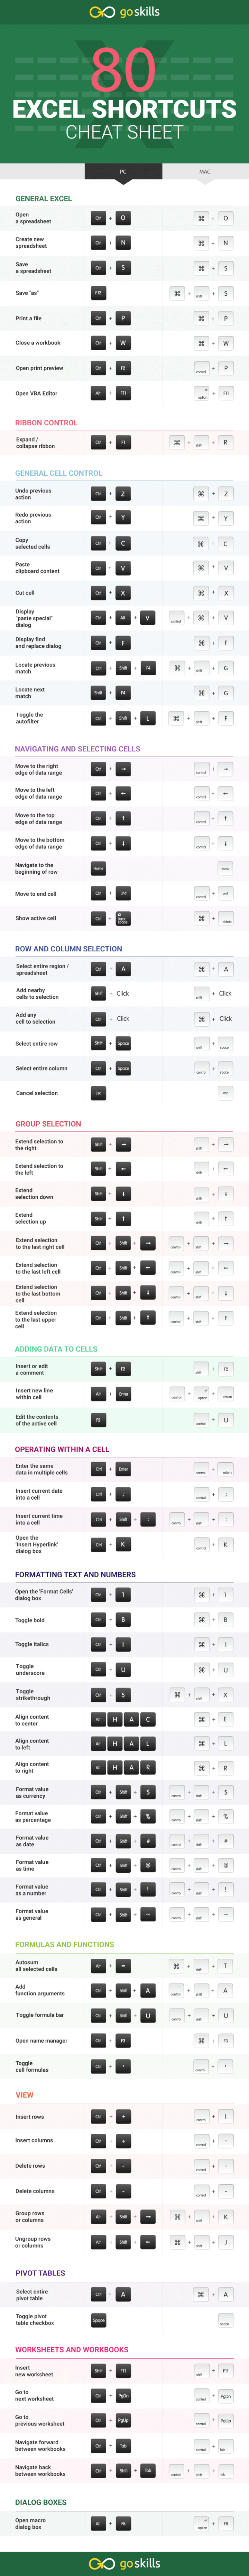 excel-shortcuts-infographic